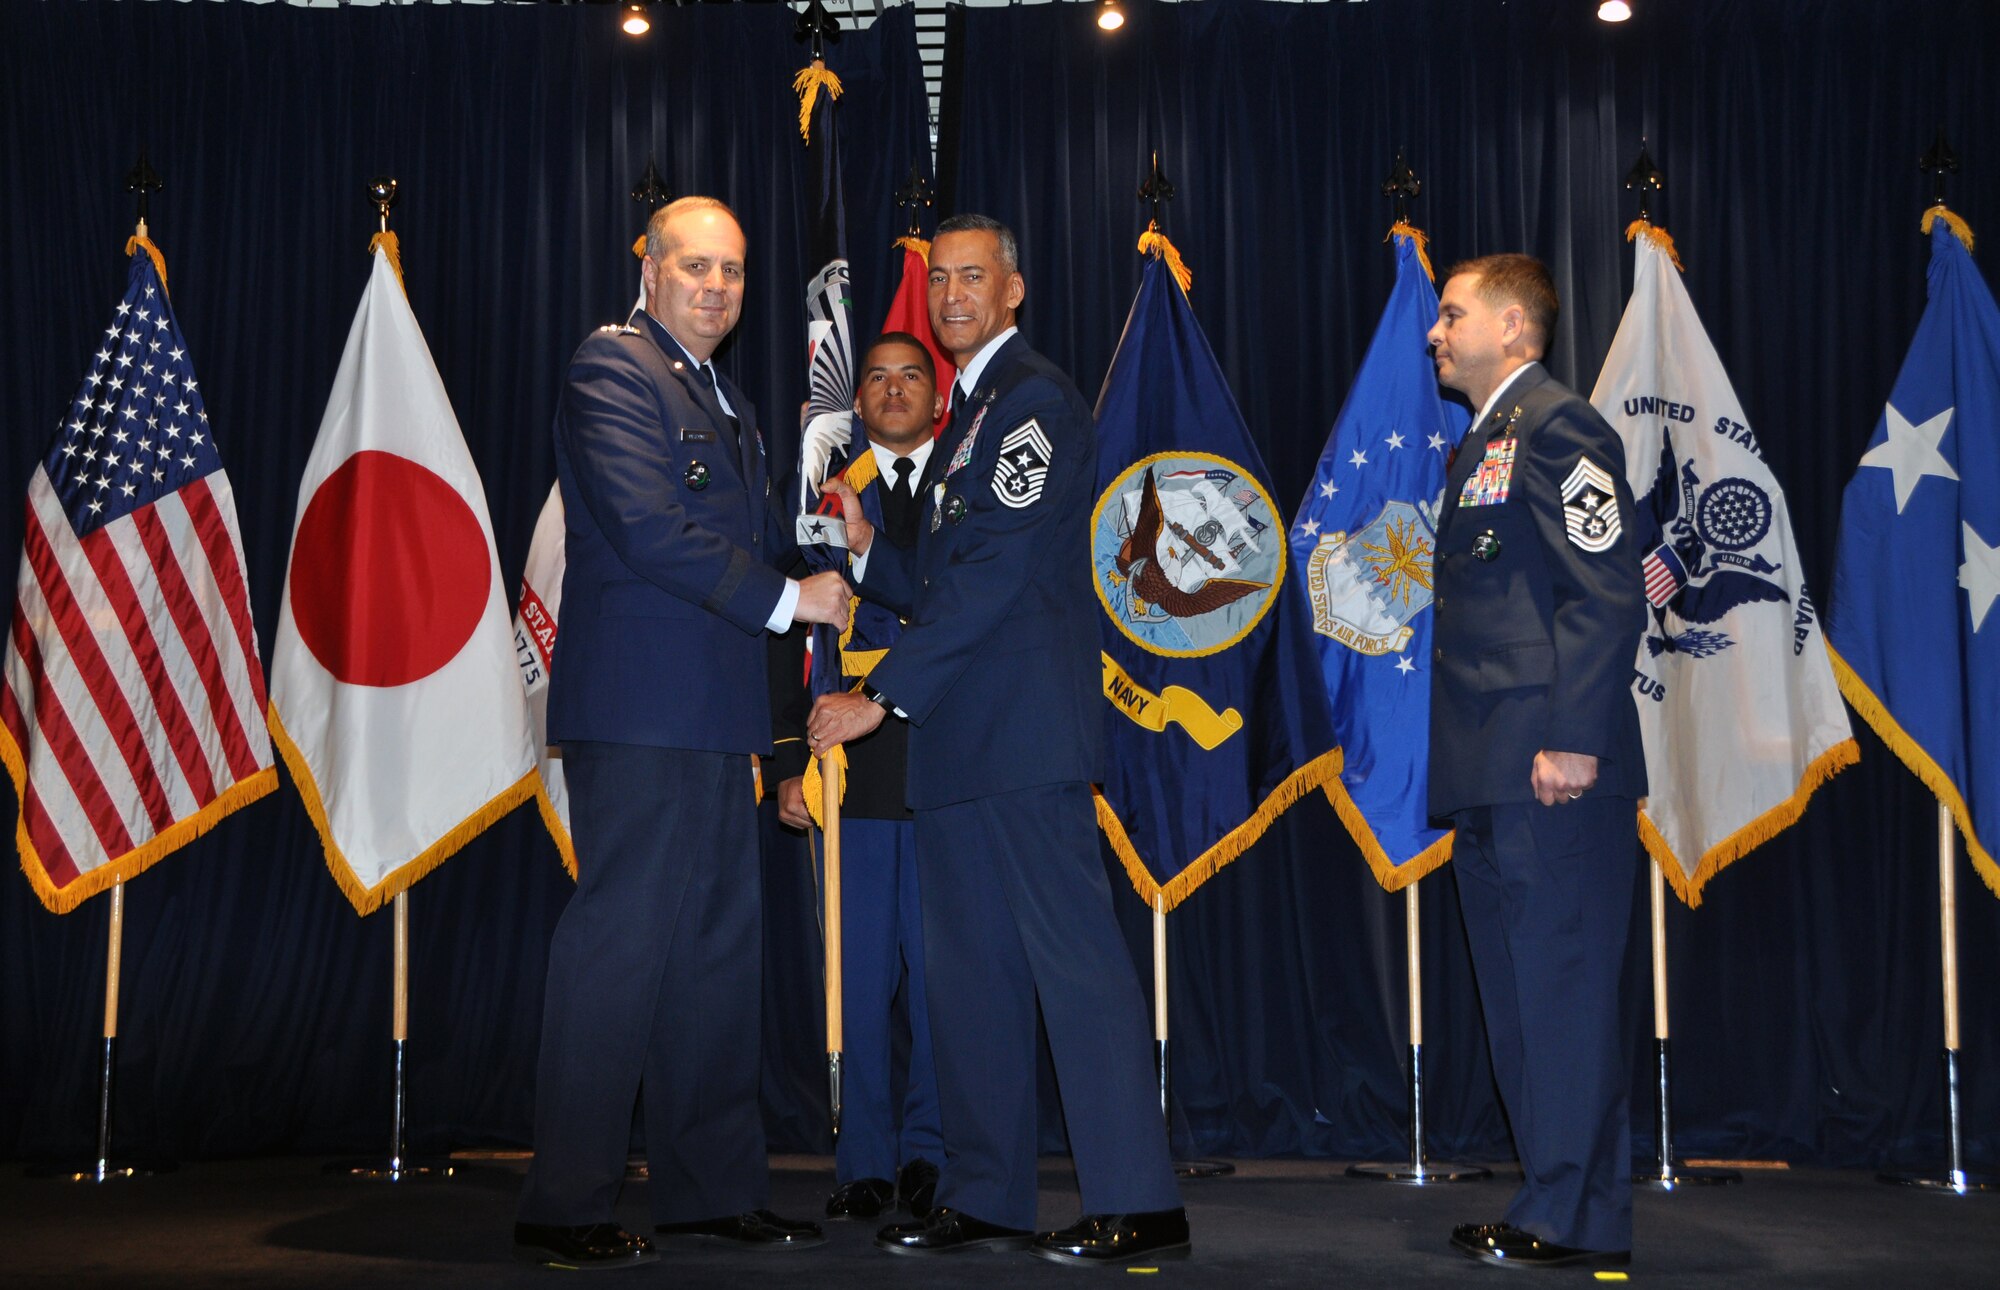 Chief Master Sgt. Terrence Greene (right), who served dual-hatted as the U.S. Forces Japan Senior Enlisted Leader and 5th Air Force Command Chief, relinquished his responsibilities to Chief Master Sgt. Richard. Winegardner Jr., who will serve as the USFJ SEL. USFJ and 5th AF commander Lt. Gen. Jerry Martinez (left) presided over the Change of Responsibility ceremony. This is the first time a senior enlisted leader will serve in each position.